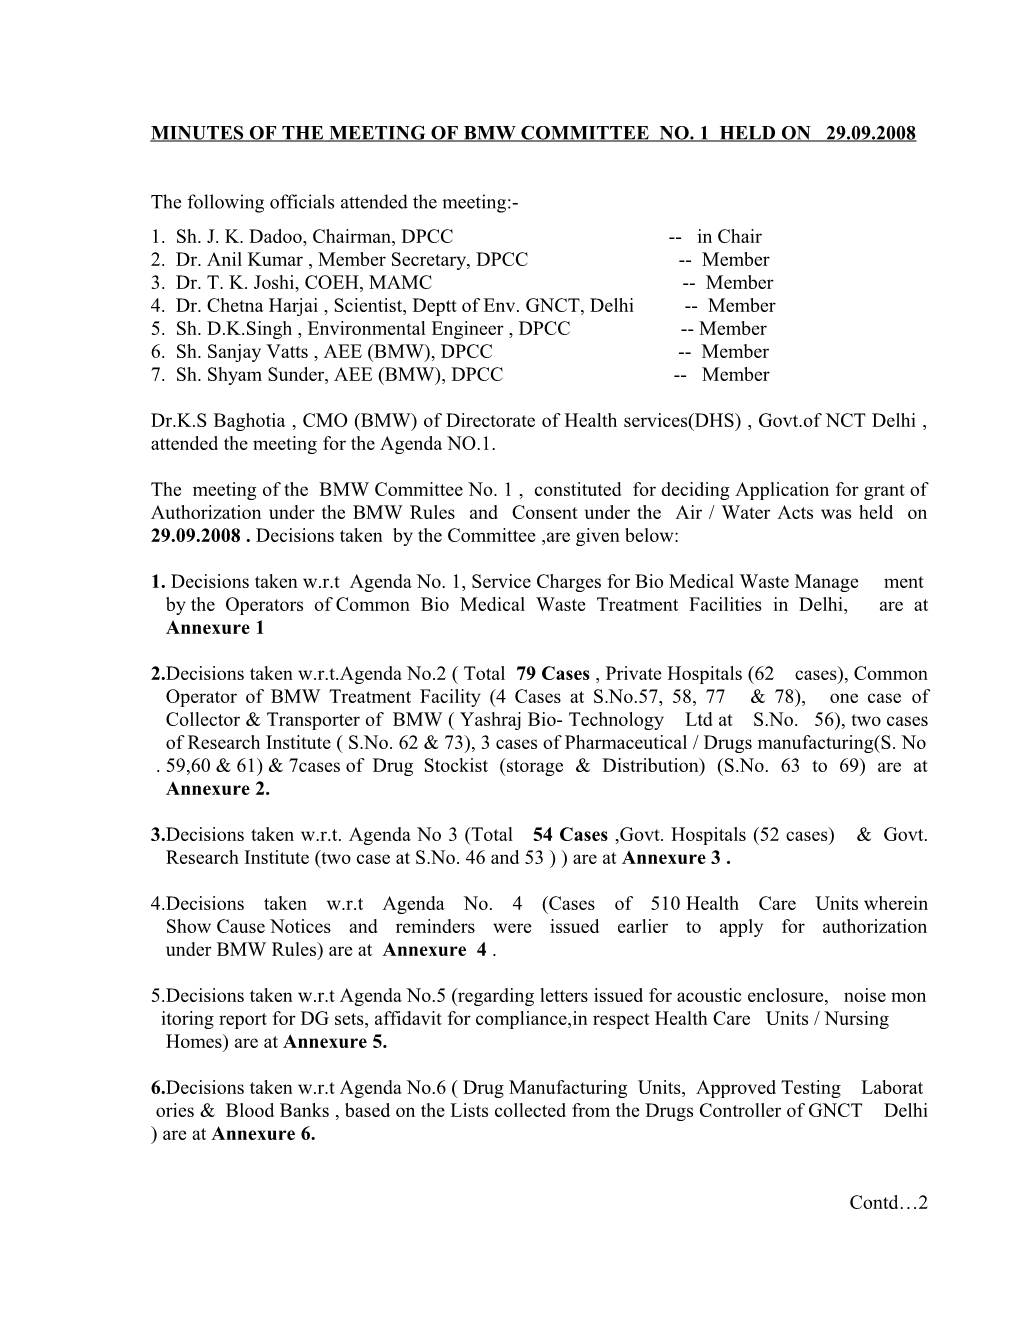 Minutes of the Meeting of Bmw Committee No. 1 Held on 29.09.2008